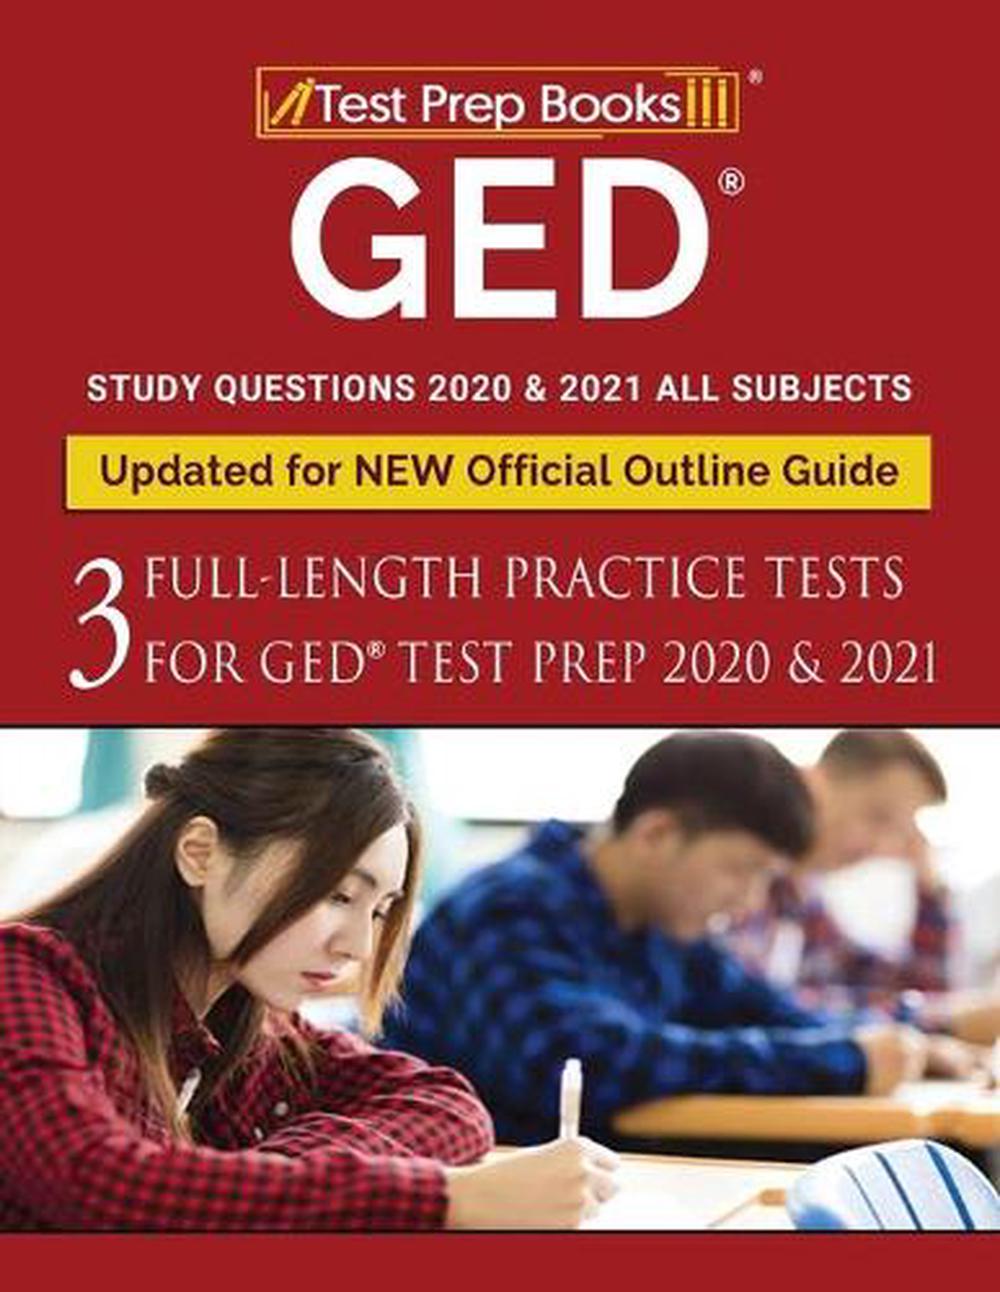 ged study guide